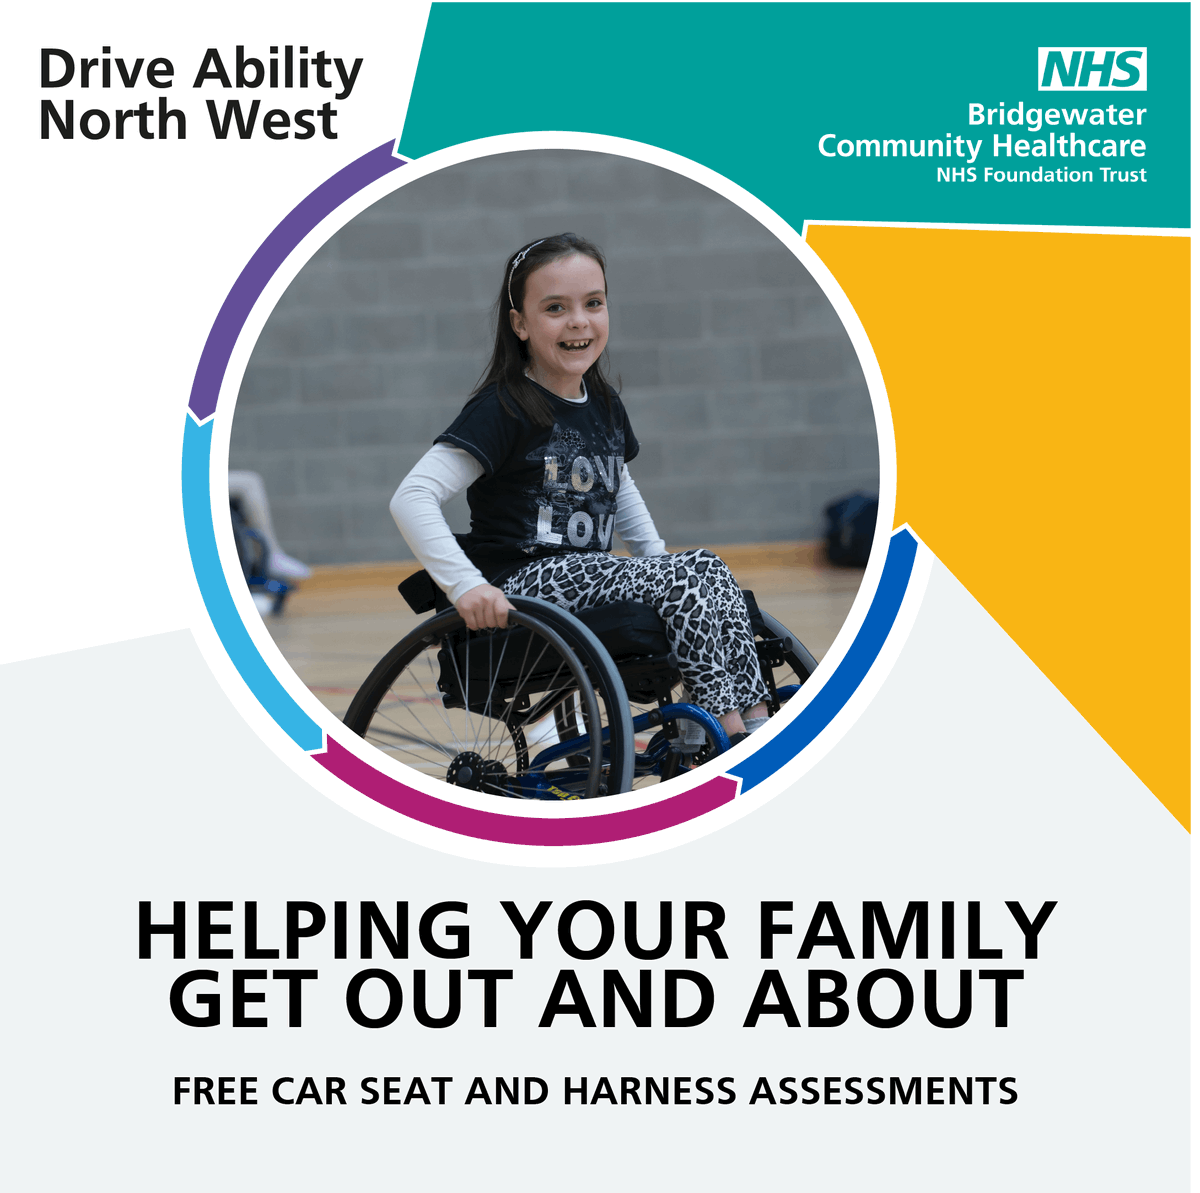 We help hundreds of children with disabilities get out and about with free car seat and harness assessments 💙 Contact us at: 📲 01942 483 713 💻bridgewater.nhs.uk/drive #CarSeat #SafeTravel #AccessibleTravel @DrivingMob